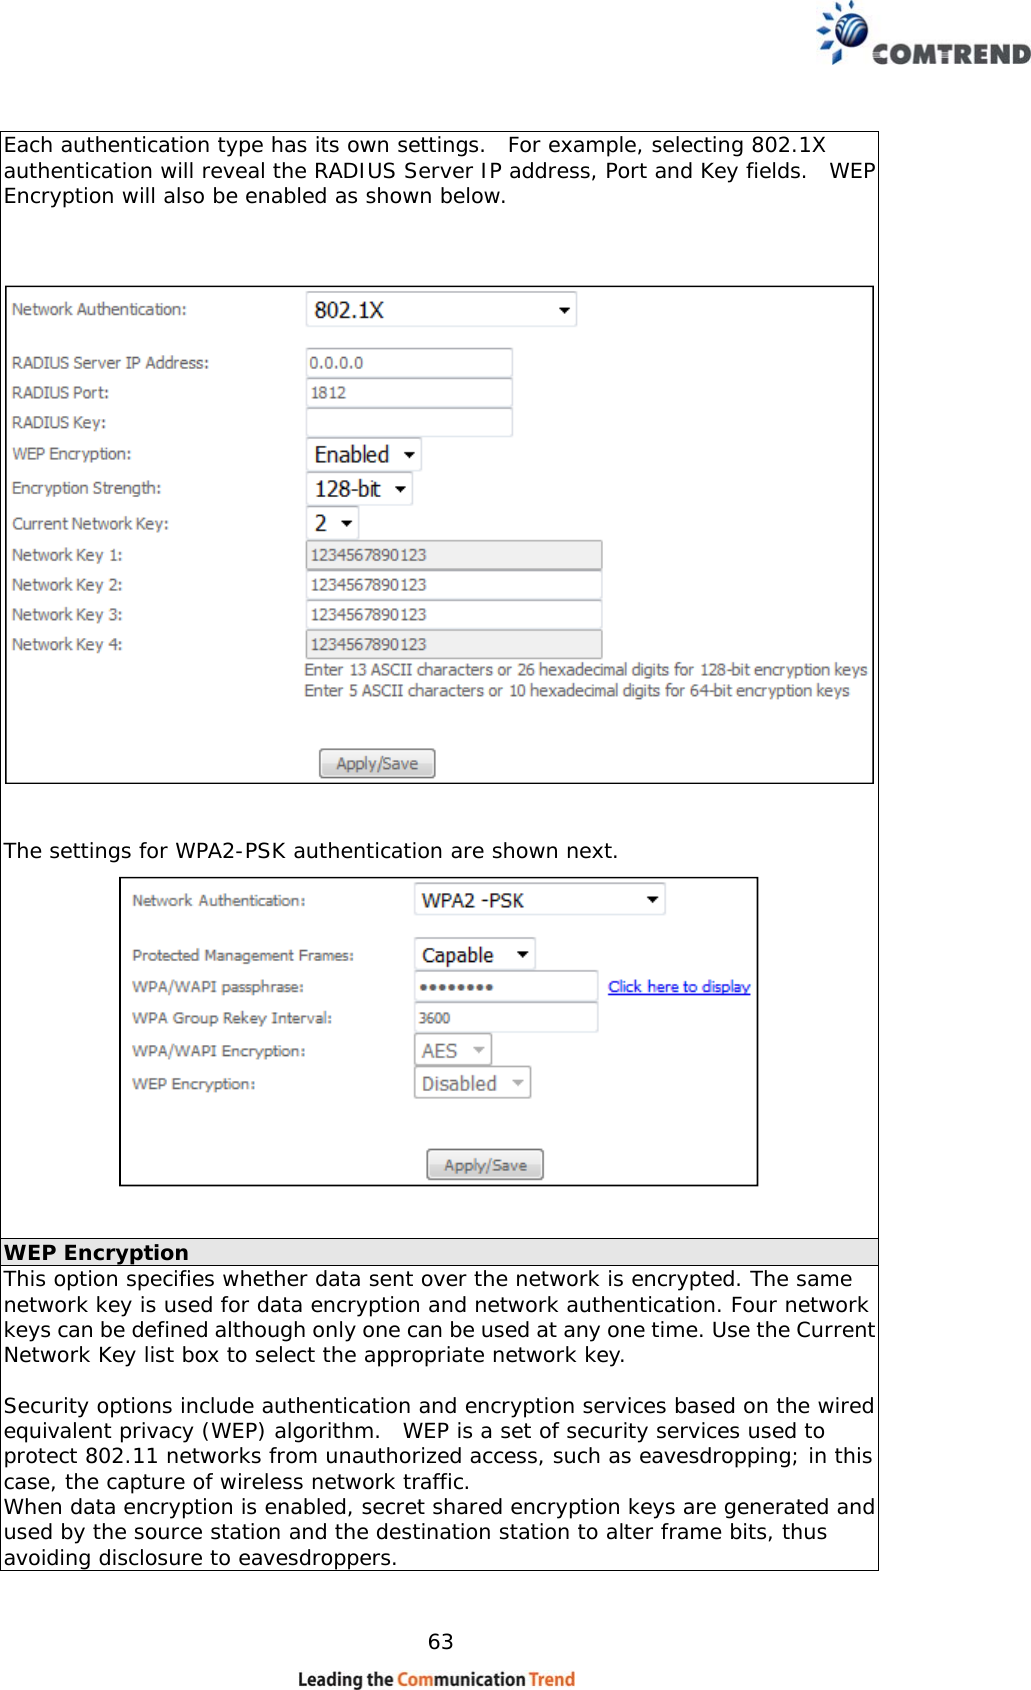    63 Each authentication type has its own settings.  For example, selecting 802.1X authentication will reveal the RADIUS Server IP address, Port and Key fields.  WEP Encryption will also be enabled as shown below.      The settings for WPA2-PSK authentication are shown next.    WEP Encryption This option specifies whether data sent over the network is encrypted. The same network key is used for data encryption and network authentication. Four network keys can be defined although only one can be used at any one time. Use the Current Network Key list box to select the appropriate network key.   Security options include authentication and encryption services based on the wired equivalent privacy (WEP) algorithm.  WEP is a set of security services used to protect 802.11 networks from unauthorized access, such as eavesdropping; in this case, the capture of wireless network traffic.   When data encryption is enabled, secret shared encryption keys are generated and used by the source station and the destination station to alter frame bits, thus avoiding disclosure to eavesdroppers. 